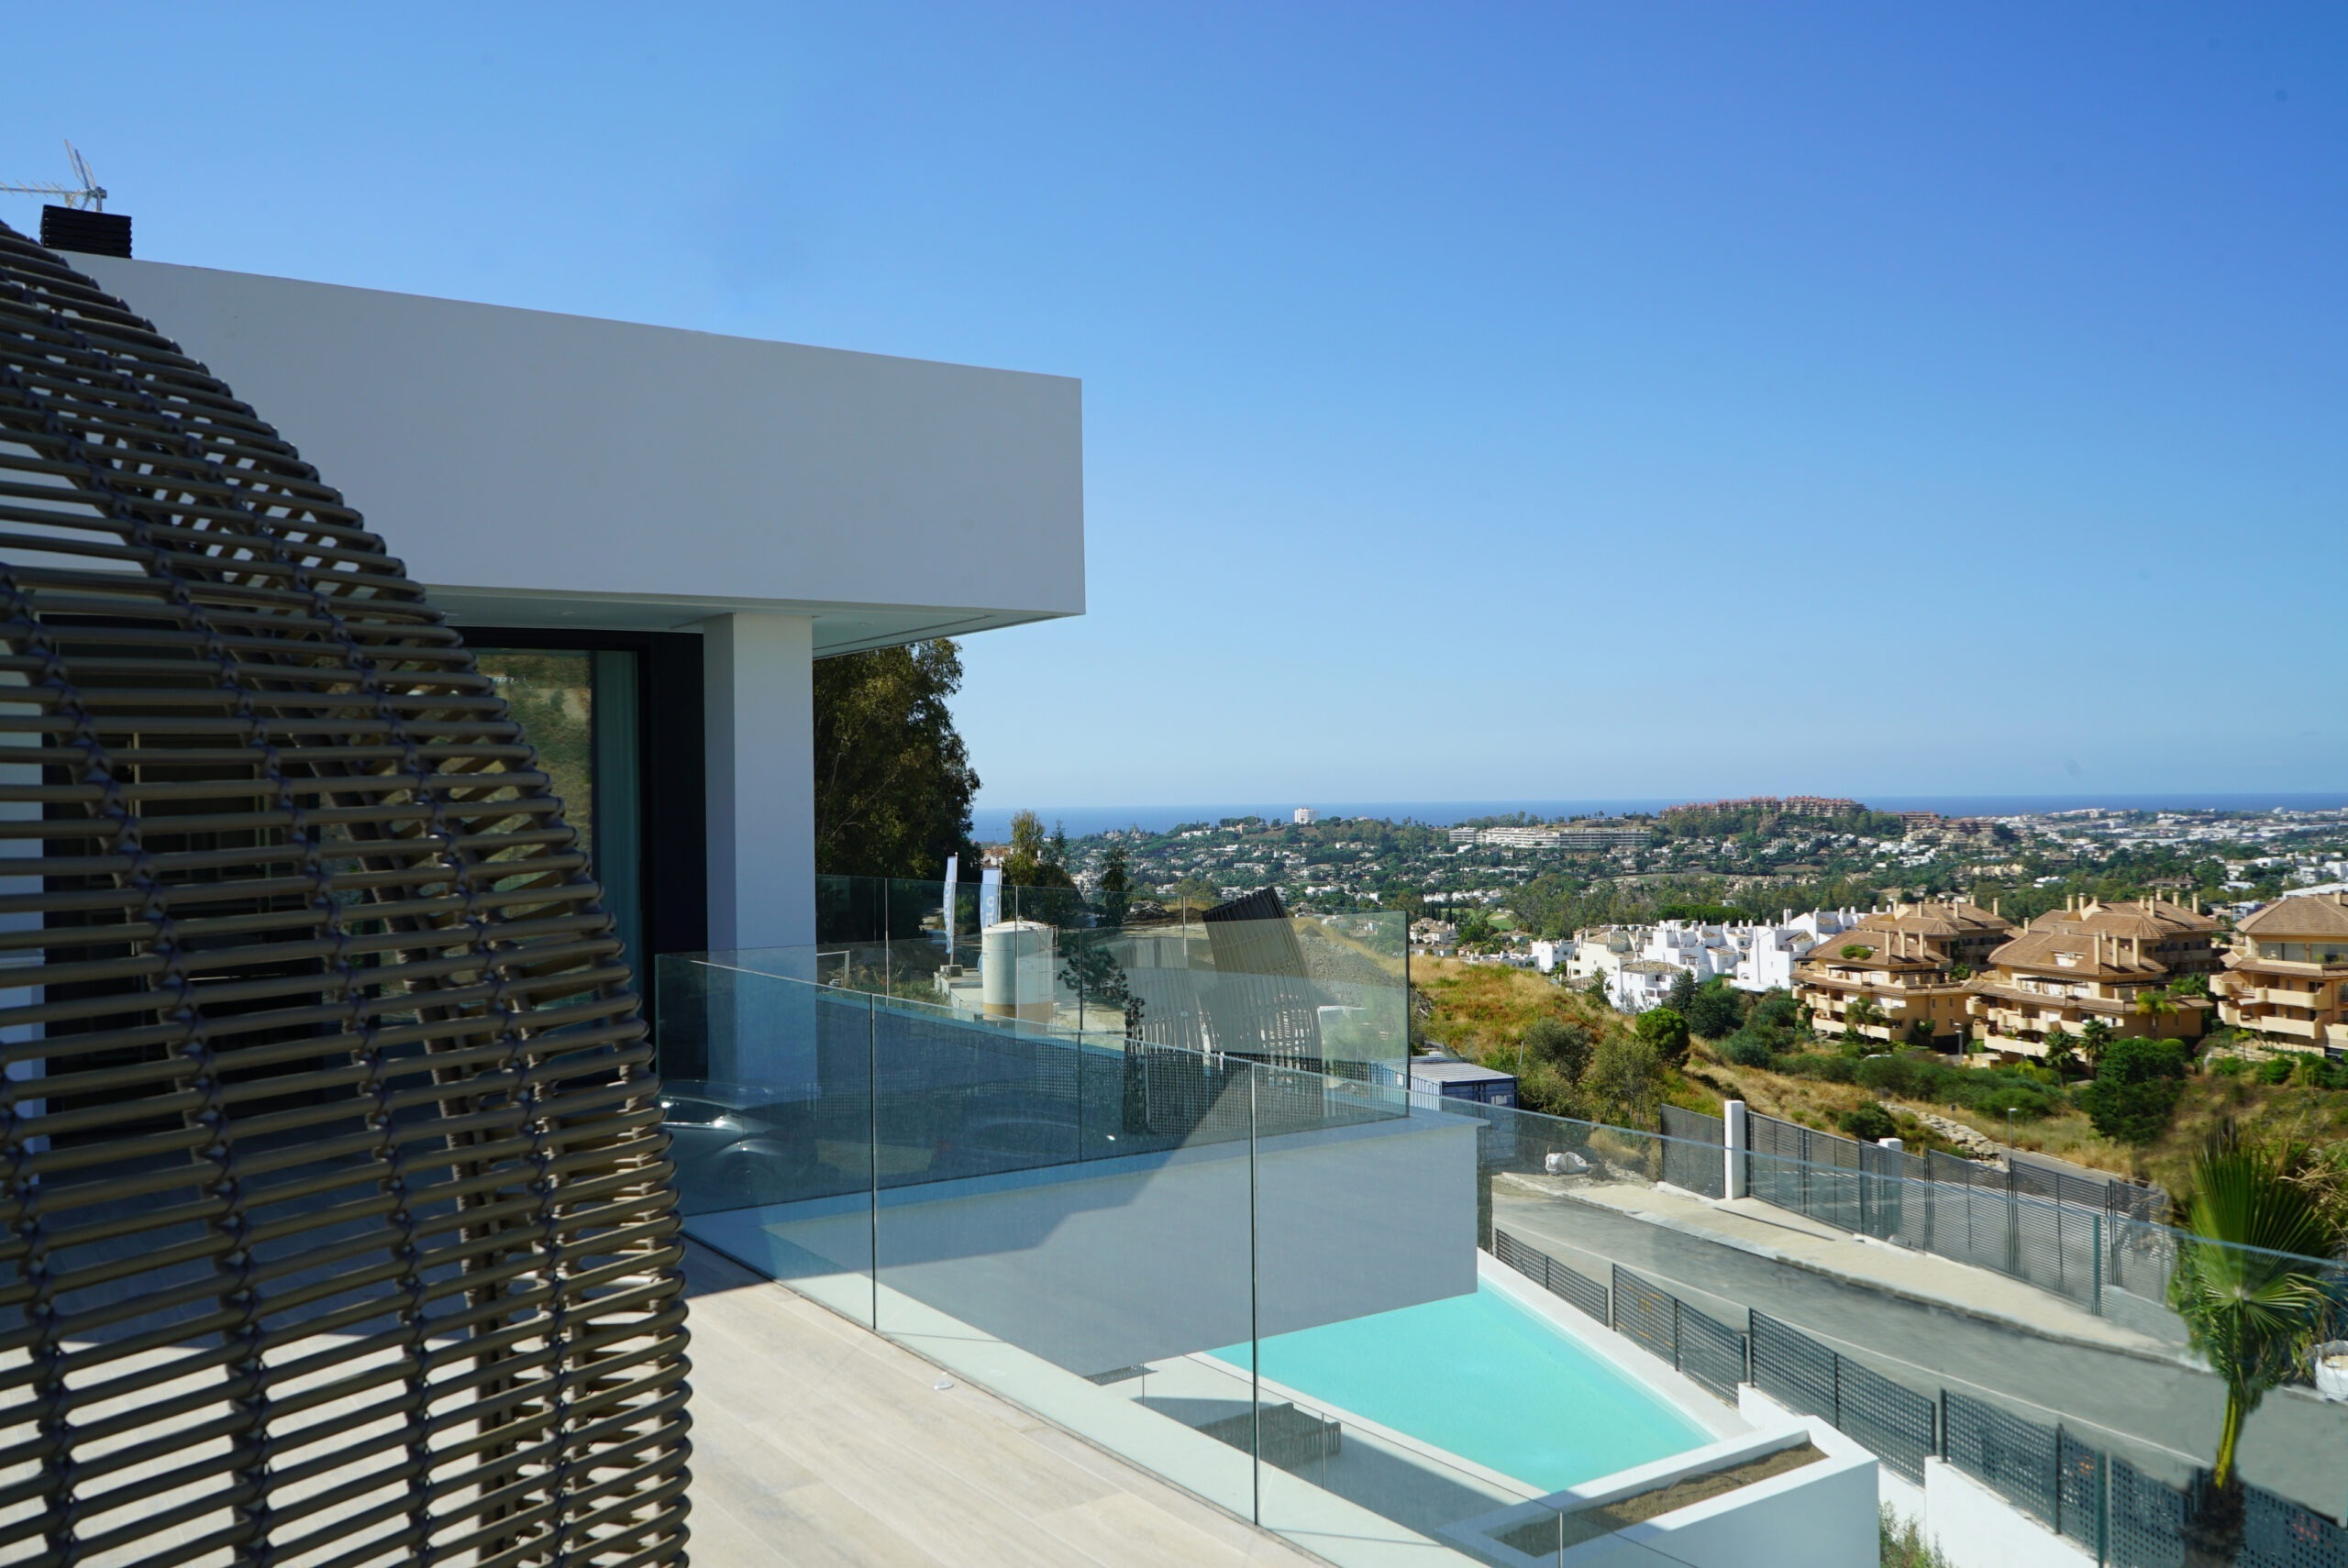 Luxurious Villa in Nueva Andalucia real state